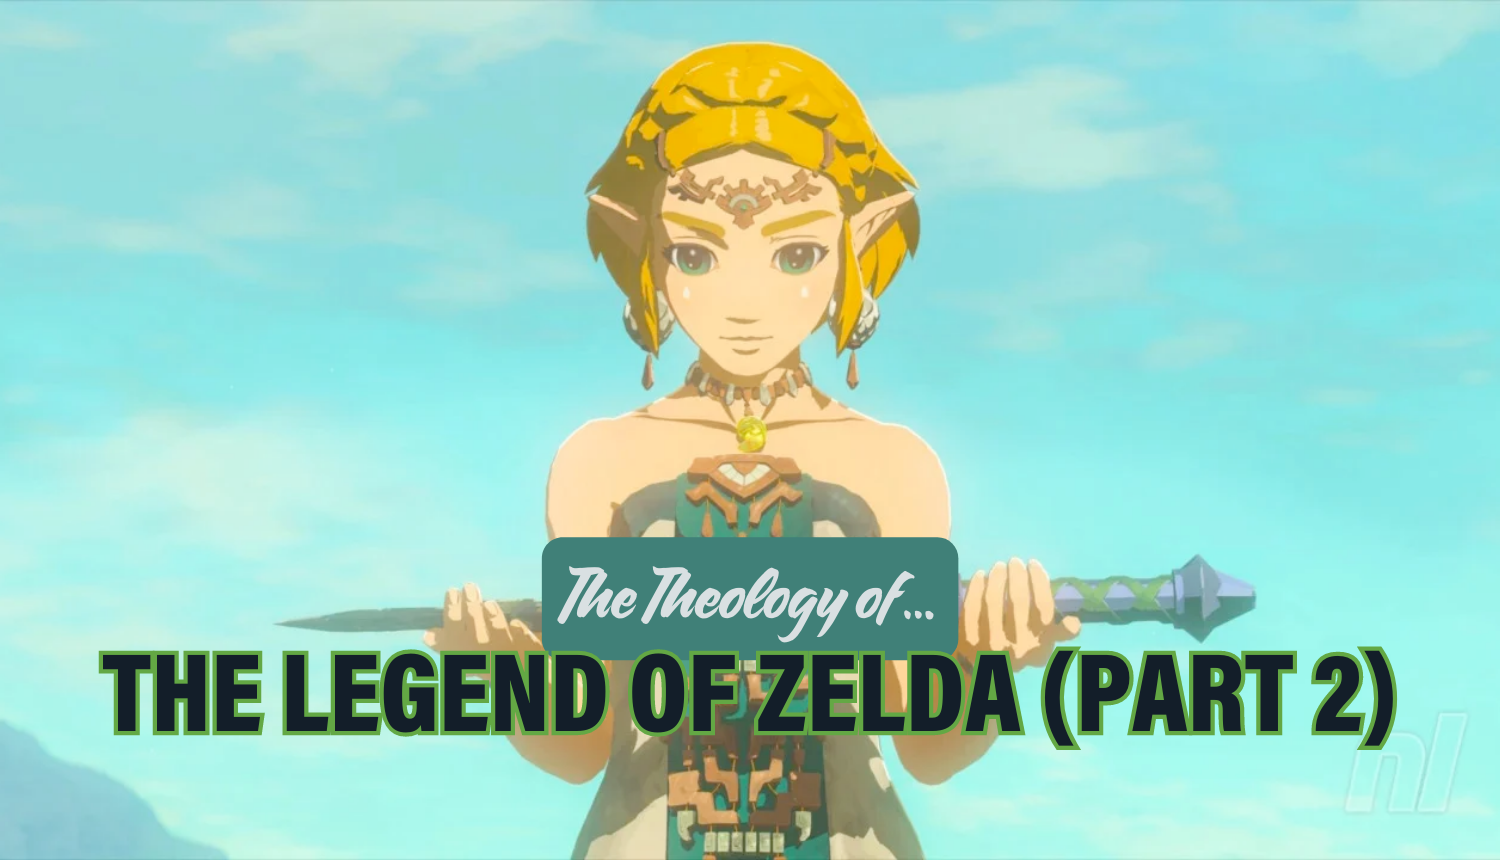 Congratulations Breath of the Wild for the 2017 Game of the Year